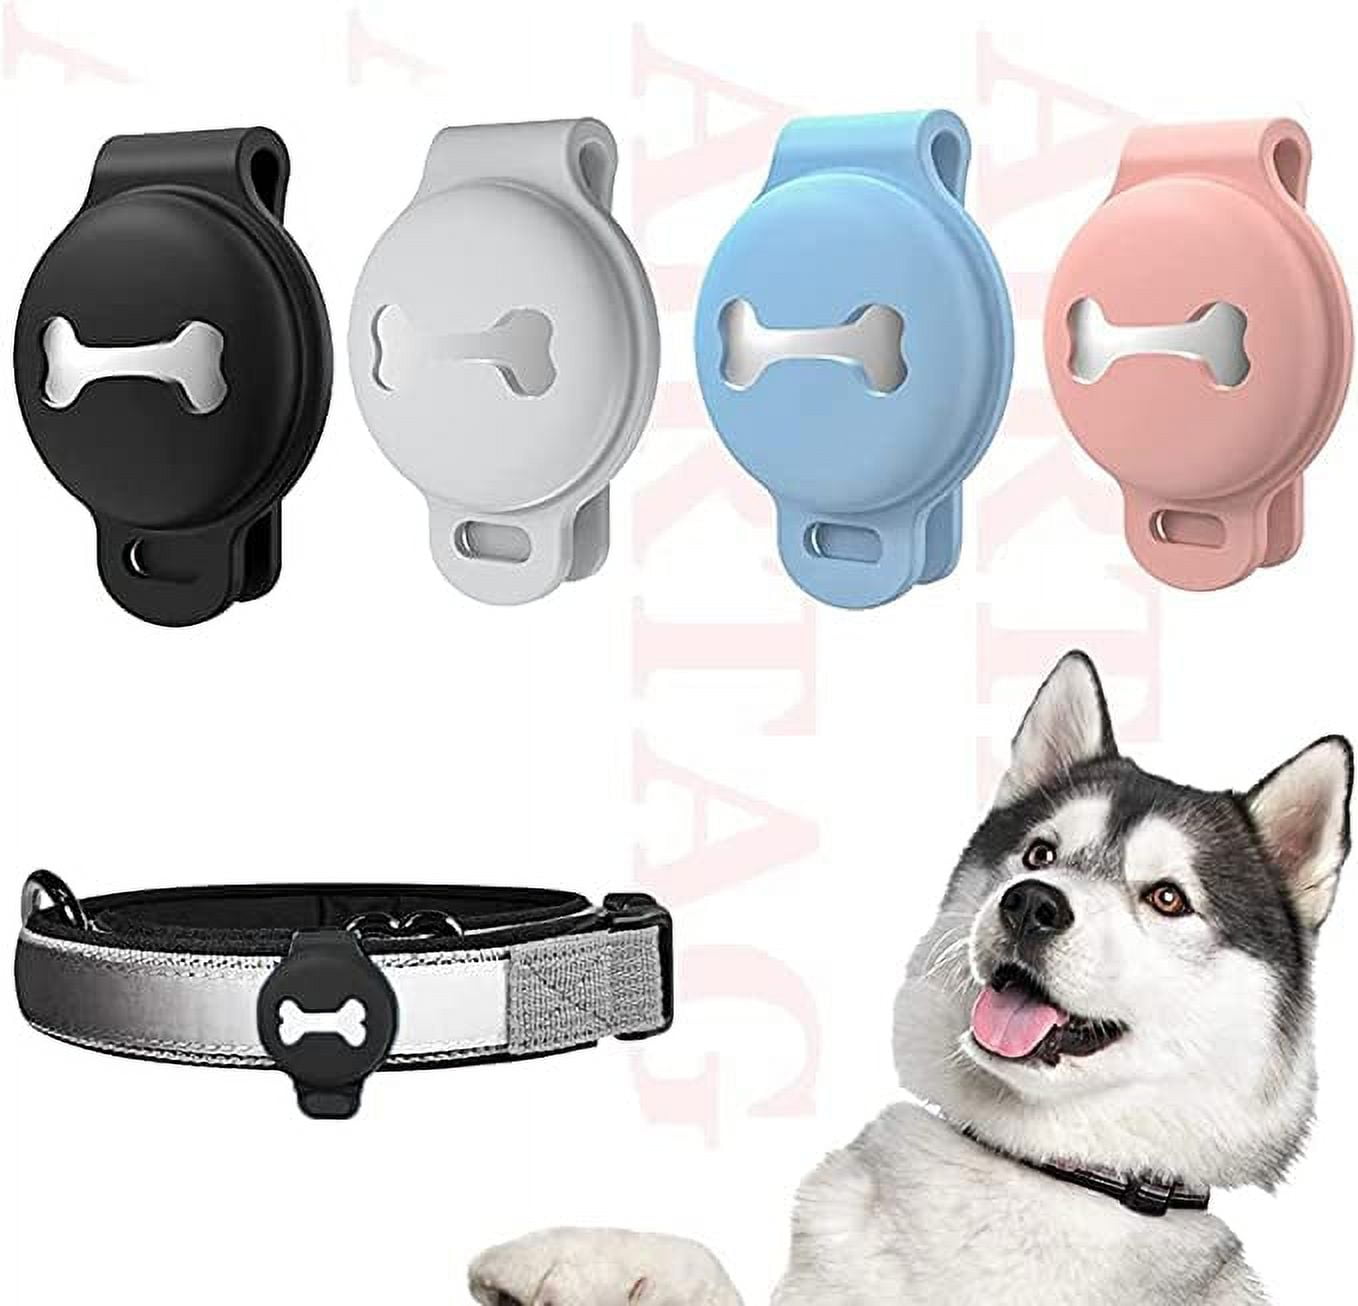 How to make an AirTag holder for your pet's collar - The Verge